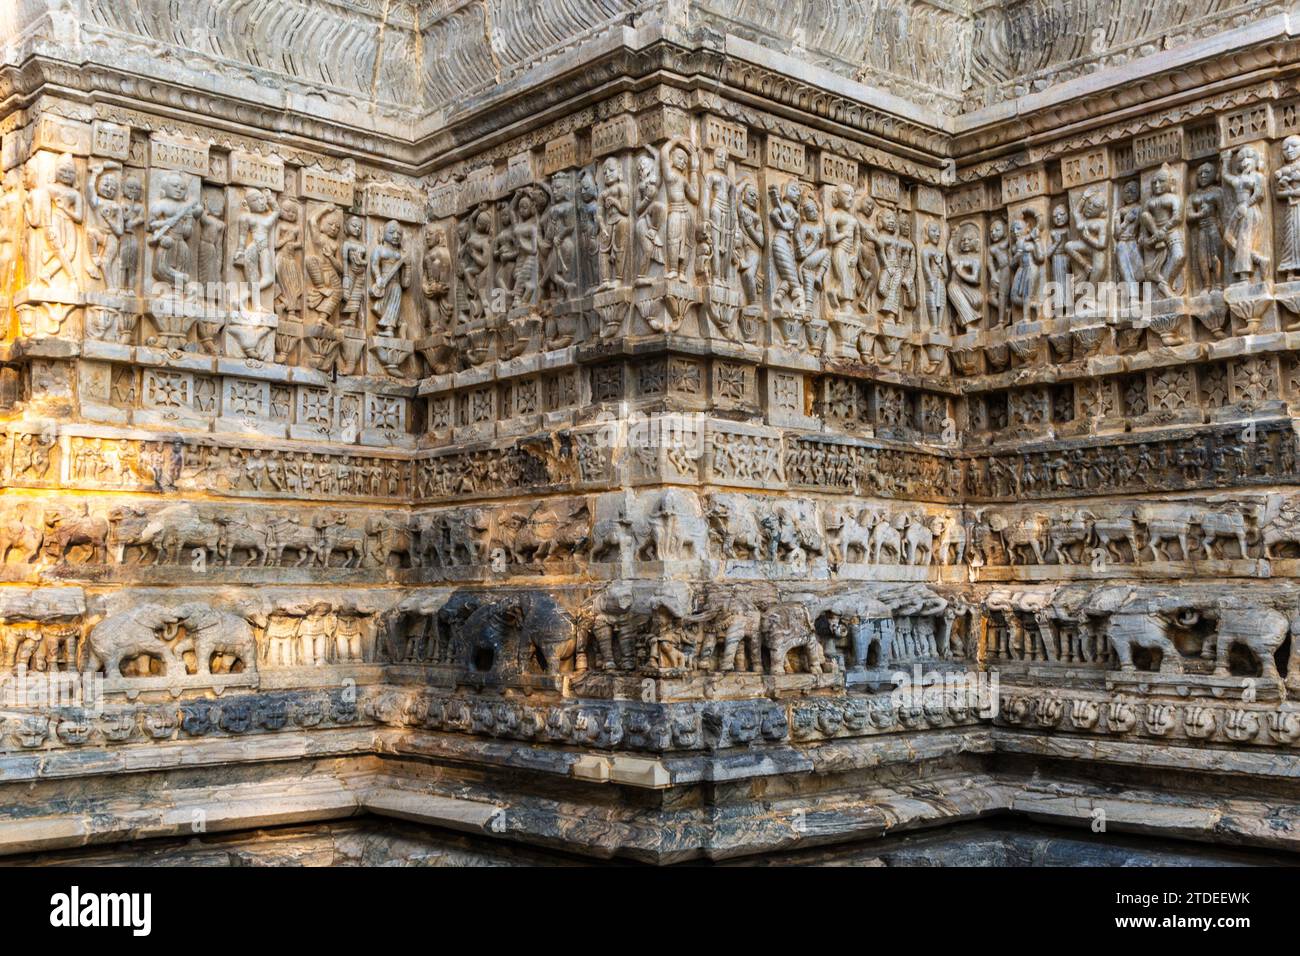 unique ancient Sculptures on hindu holy temple wall at day image is taken at Jagdish Temple udaipur rajasthan india. Stock Photo